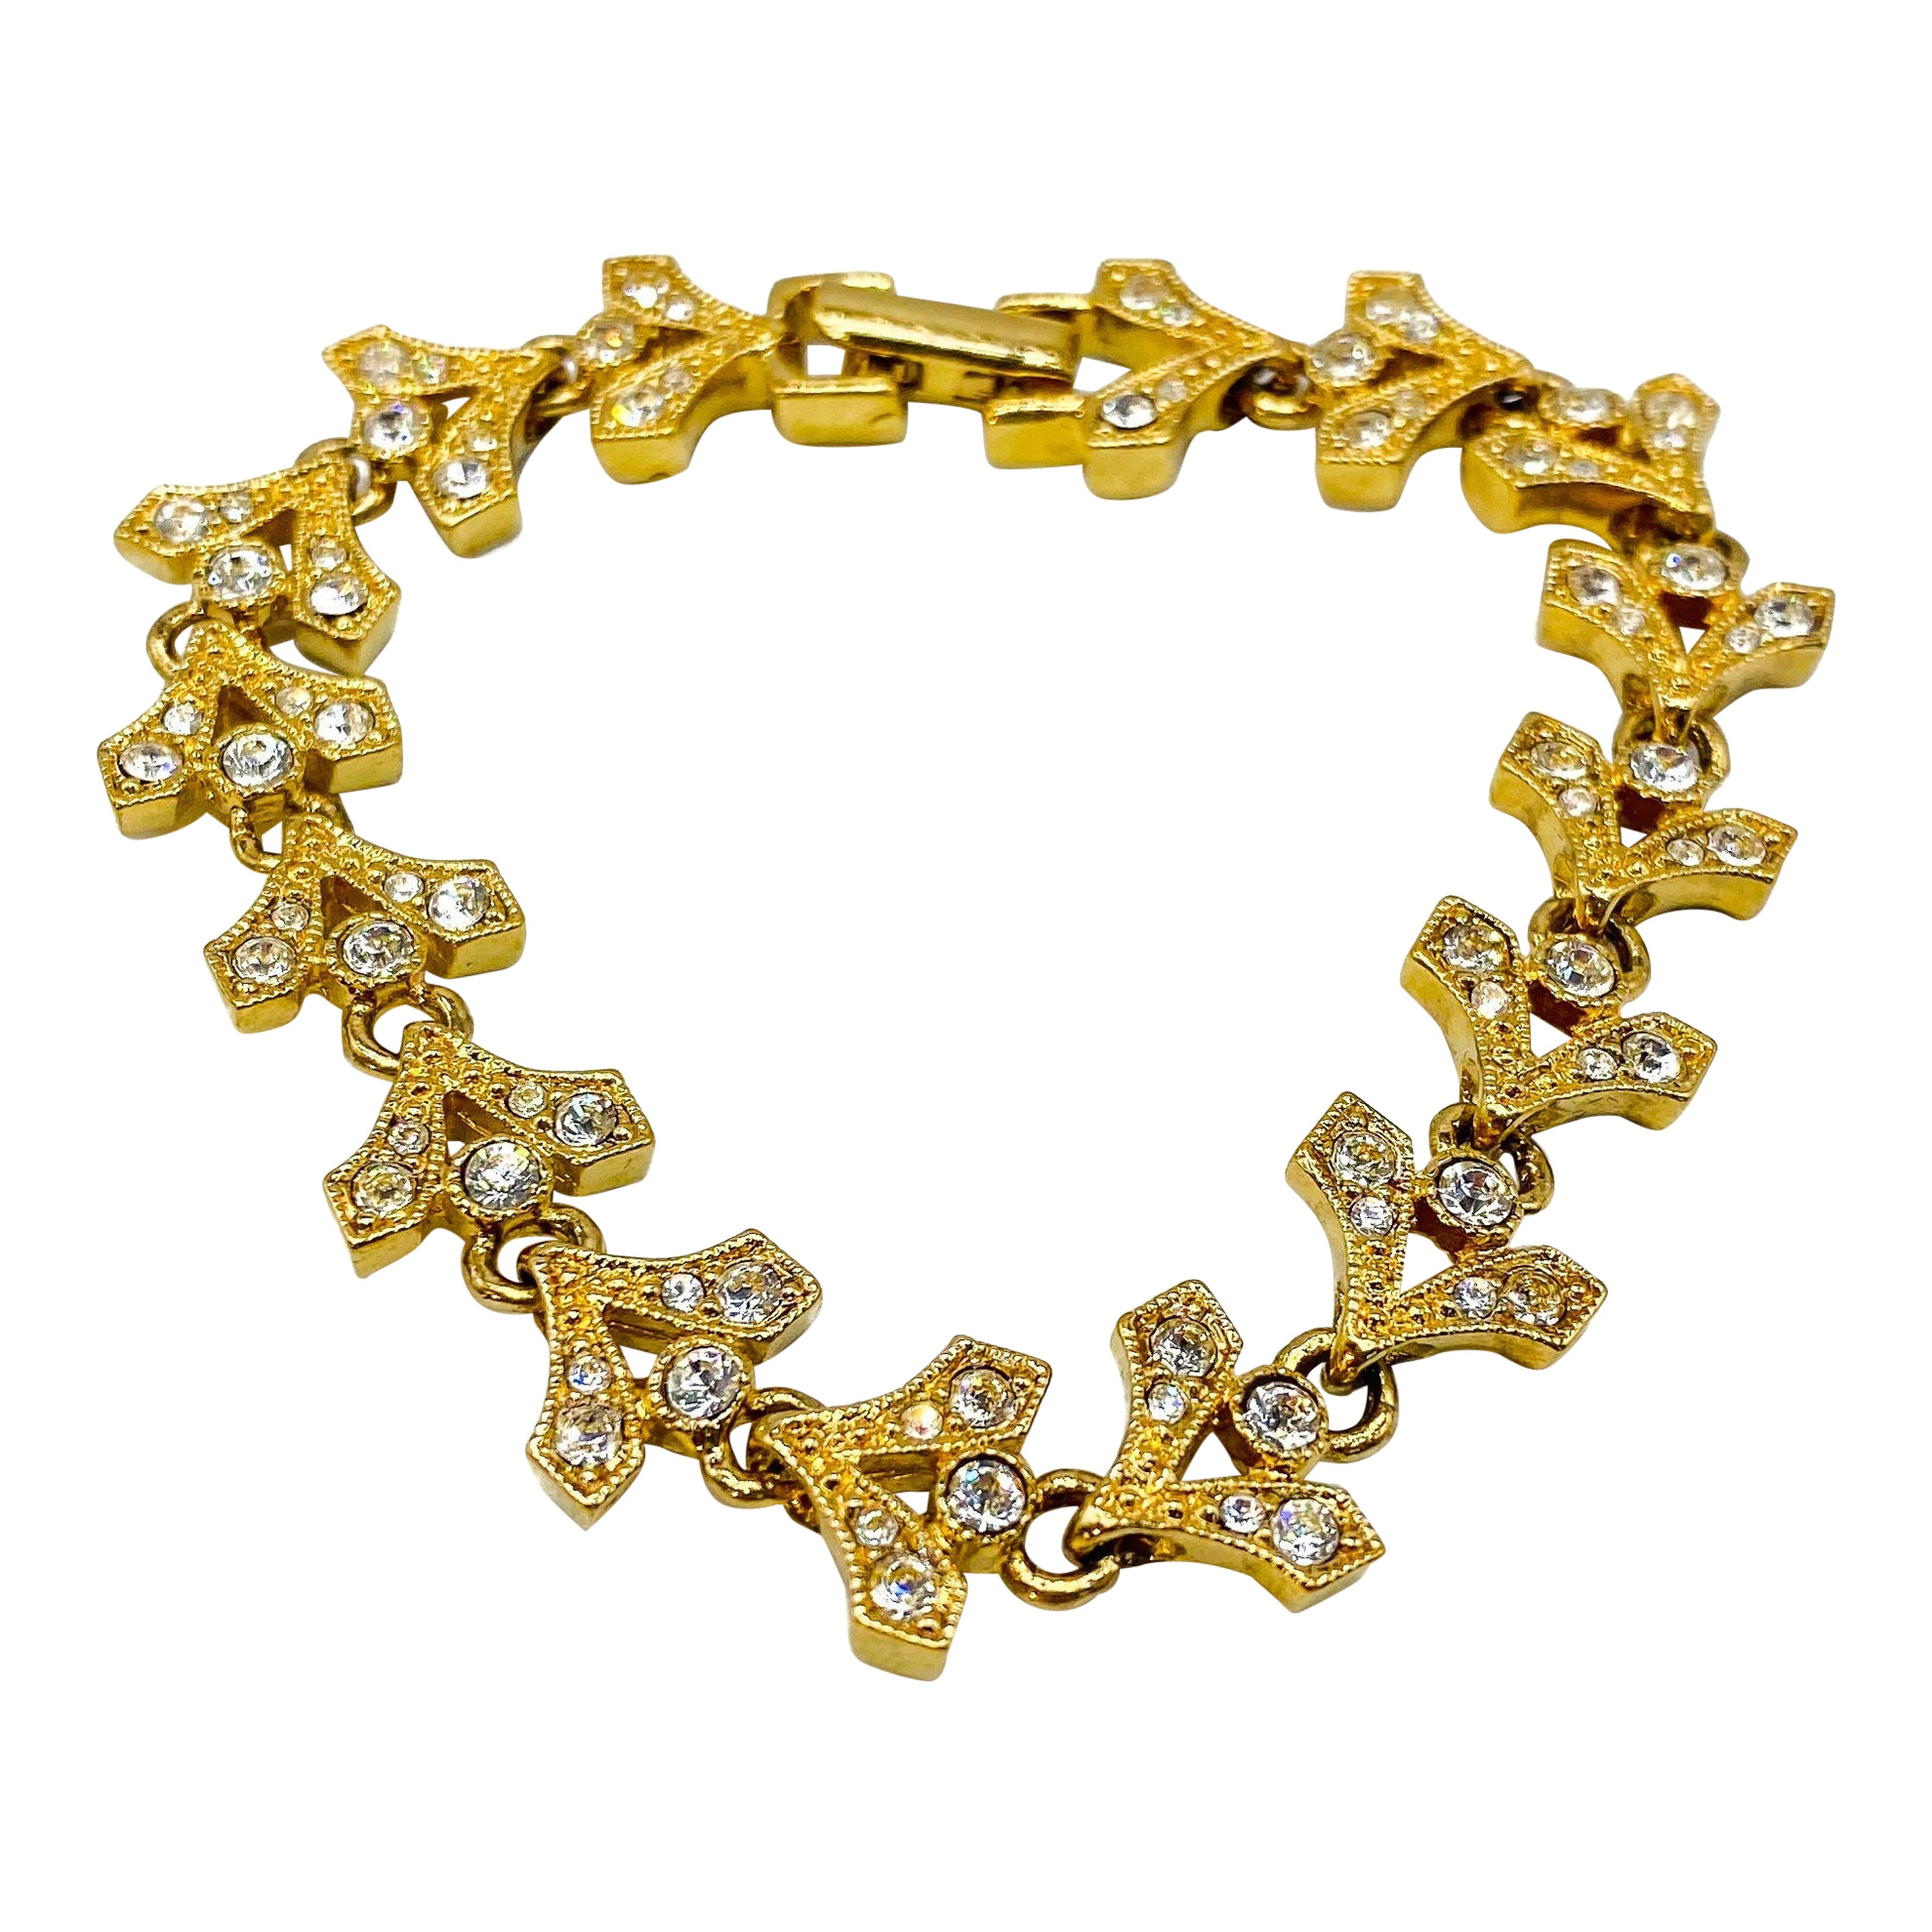 Vintage Napier Bracelet in in Gold Plated Metal and Crystal, 1980s